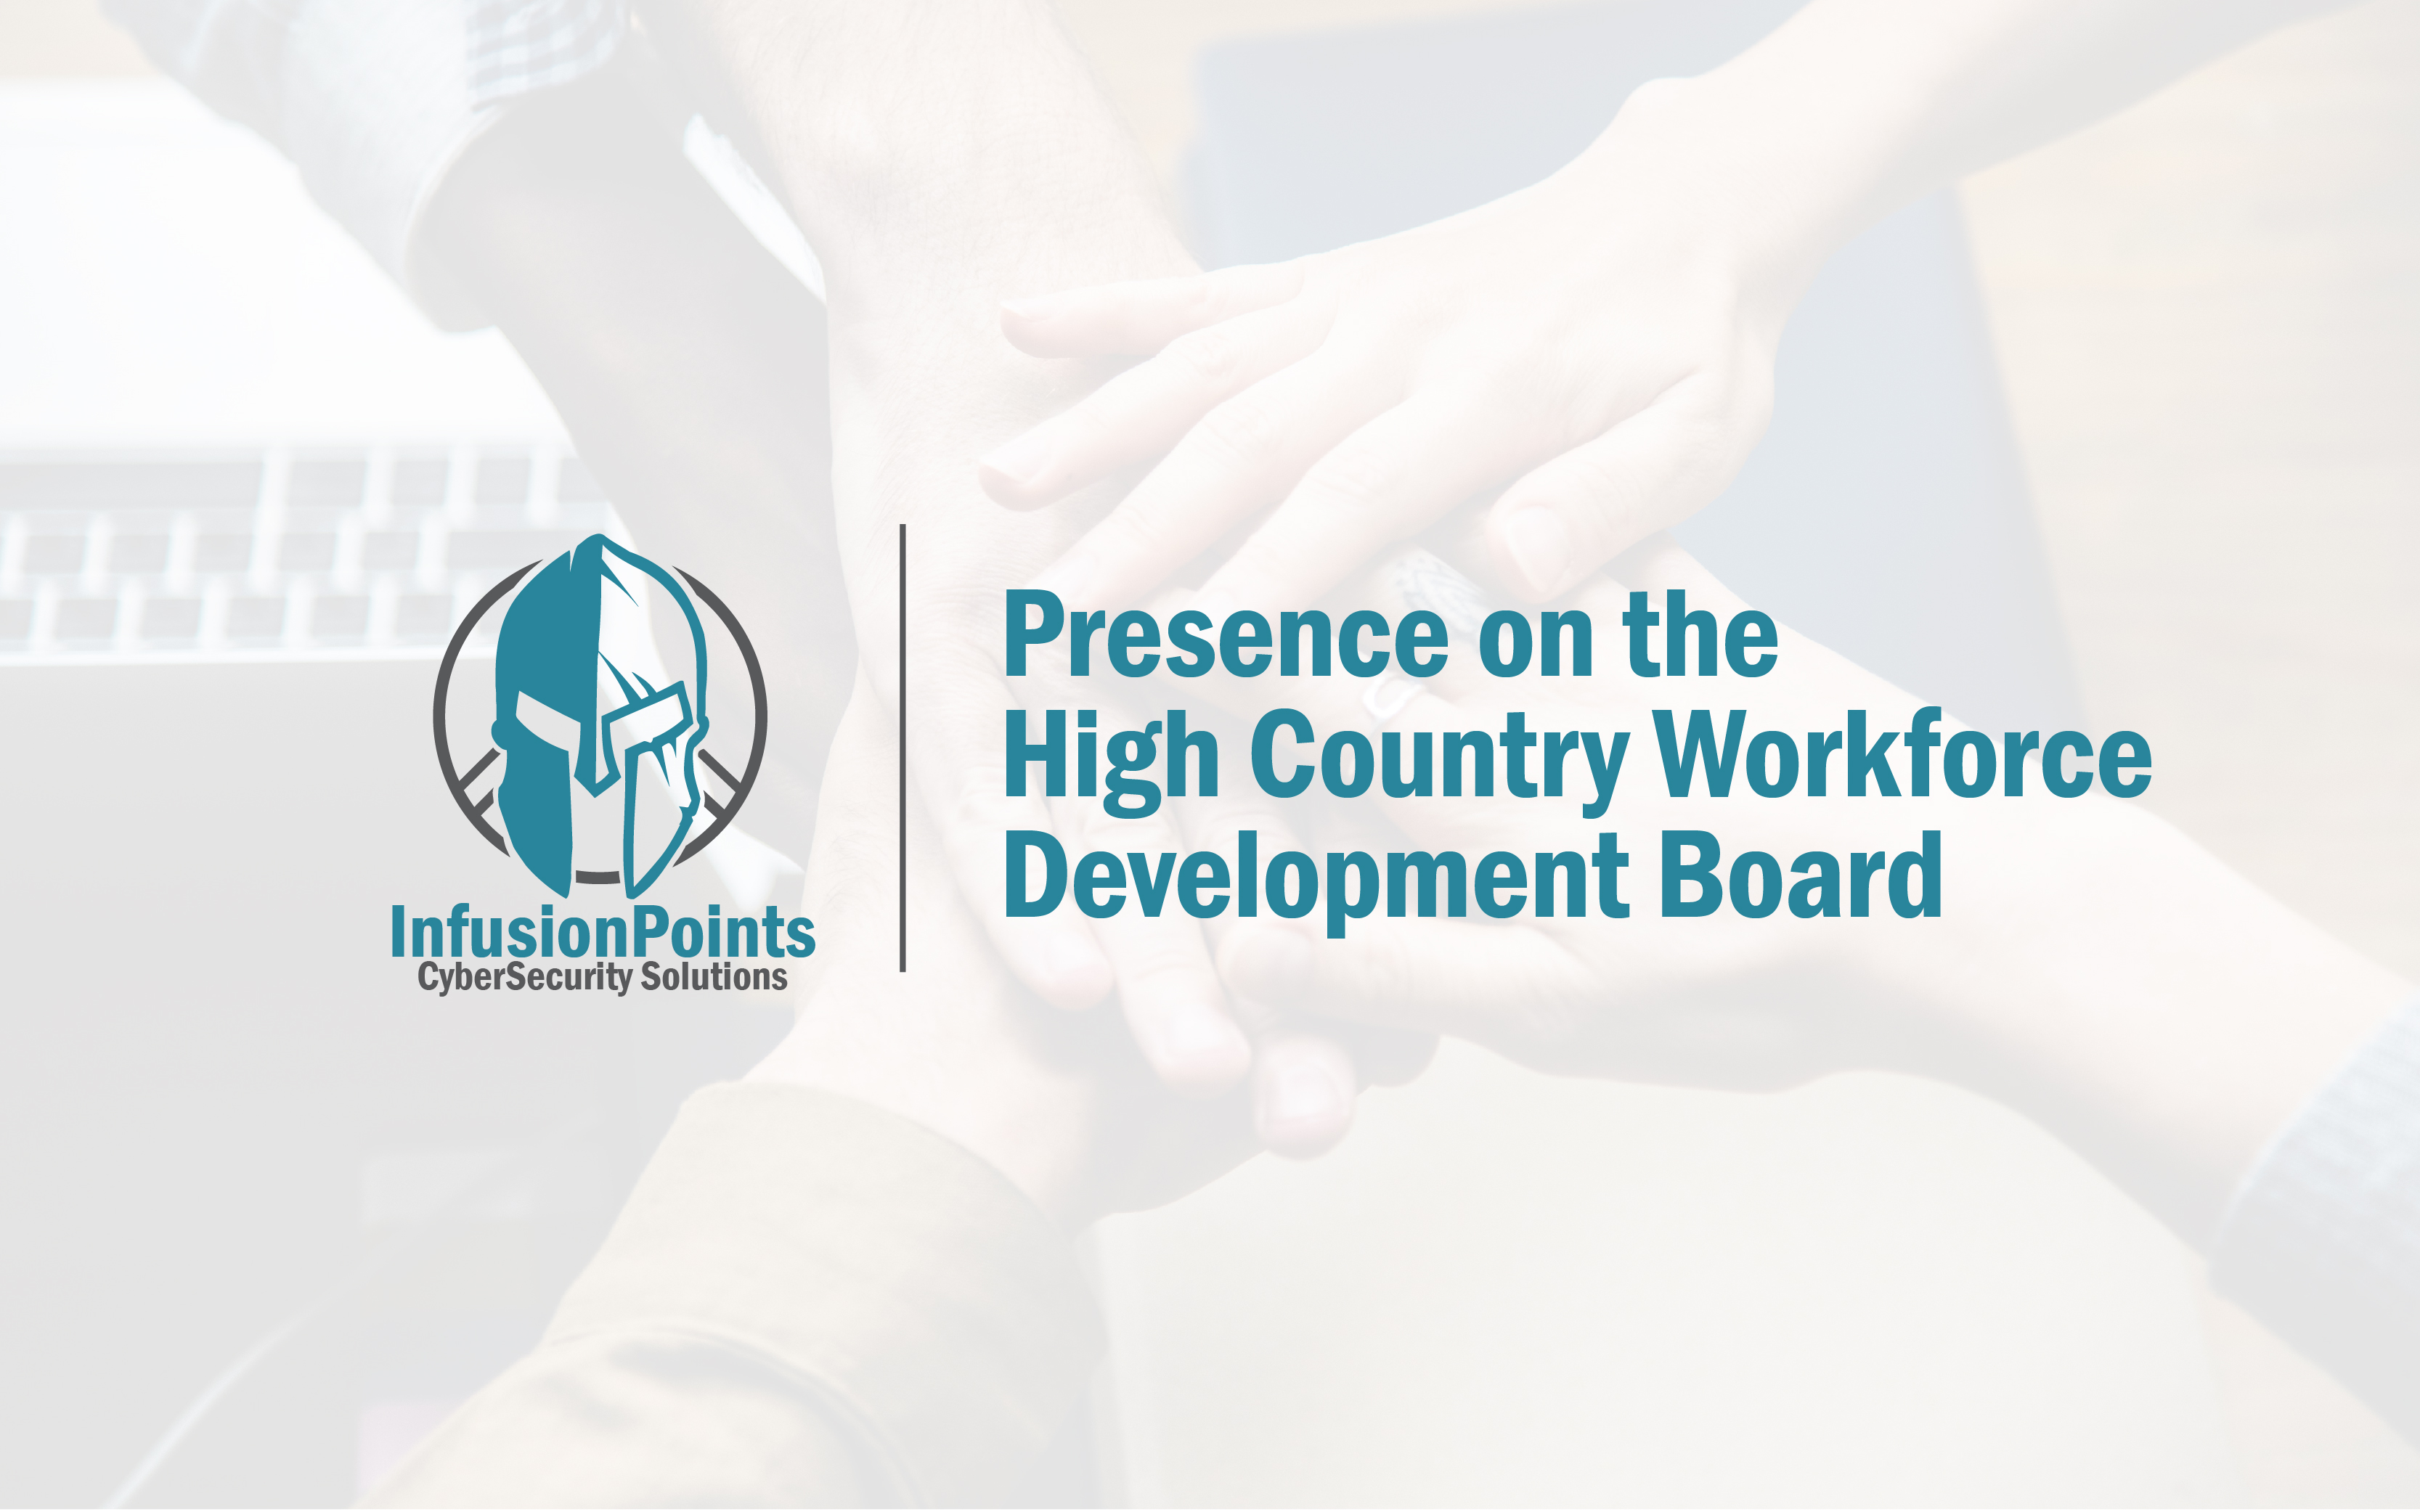 InfusionPoints presence on the High Country Workforce development board